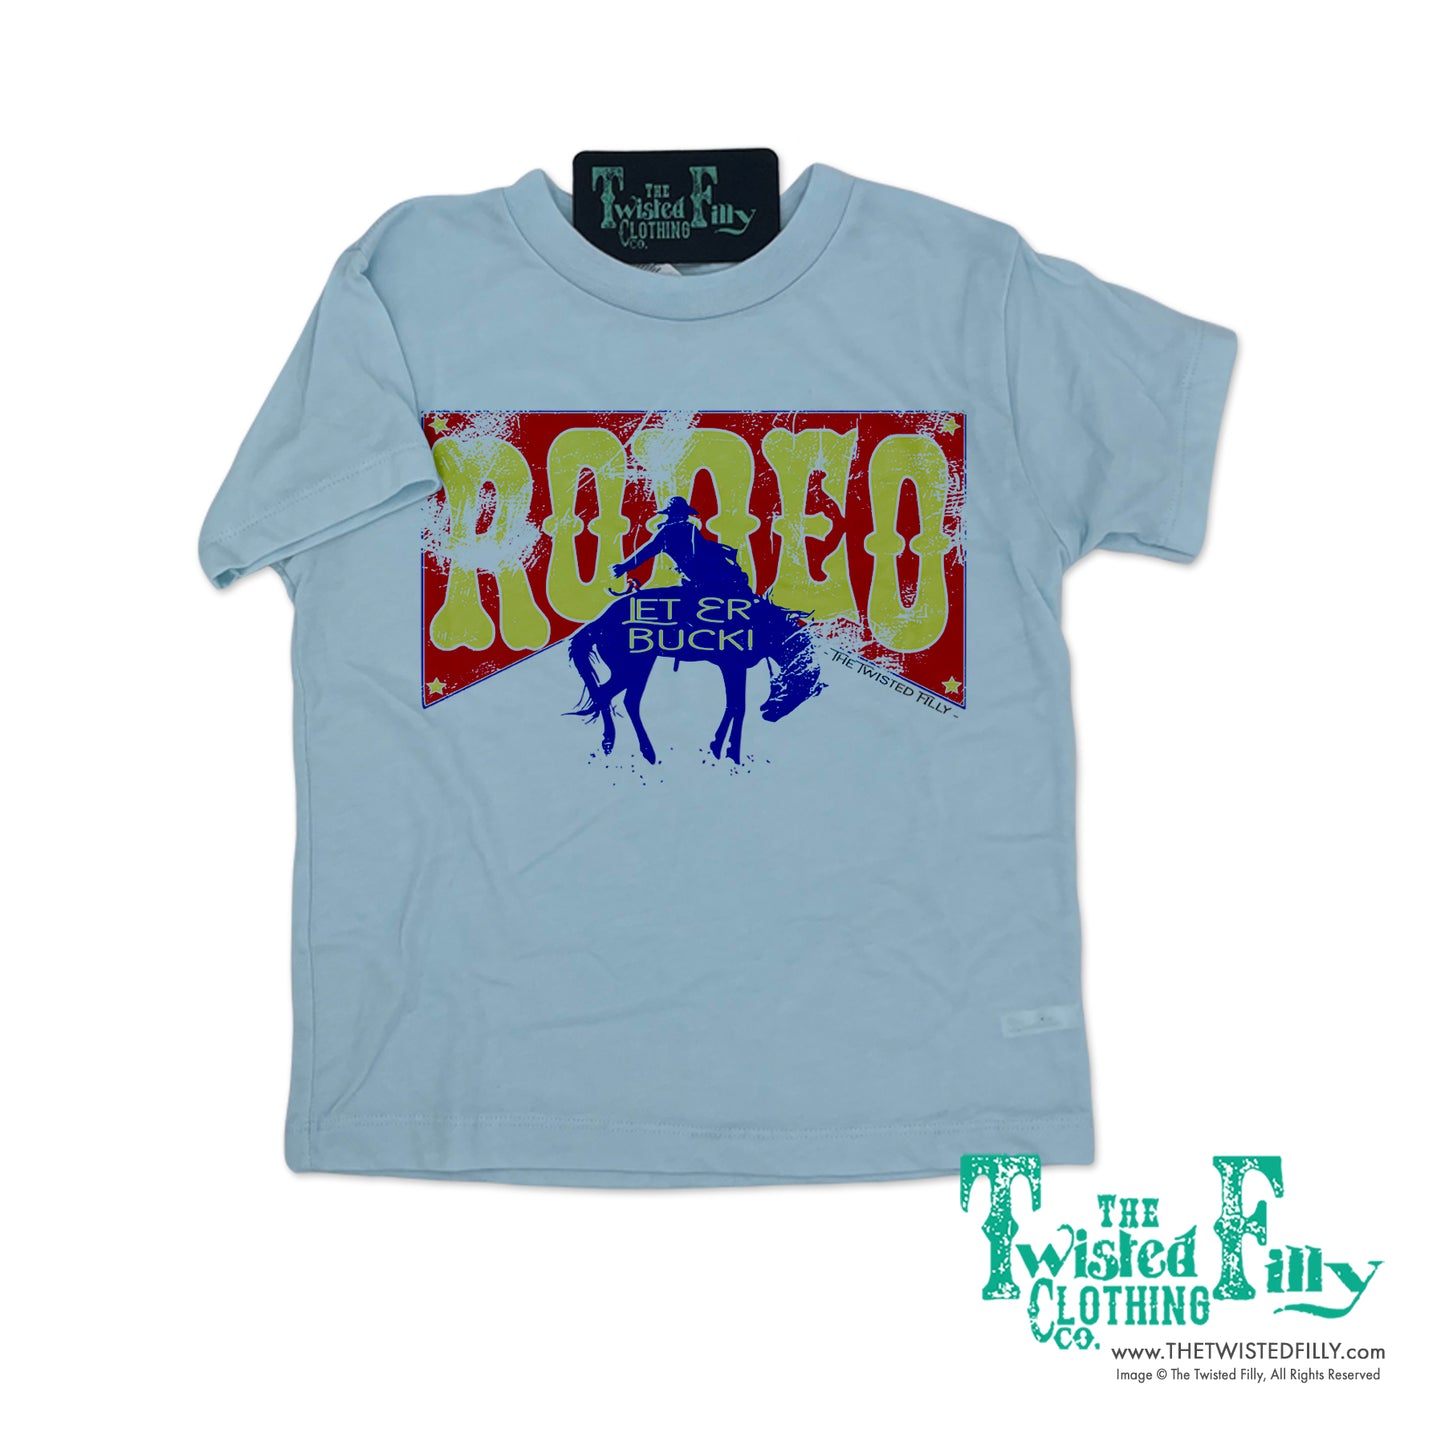 Rodeo - S/S Toddler Tee - Assorted Colors